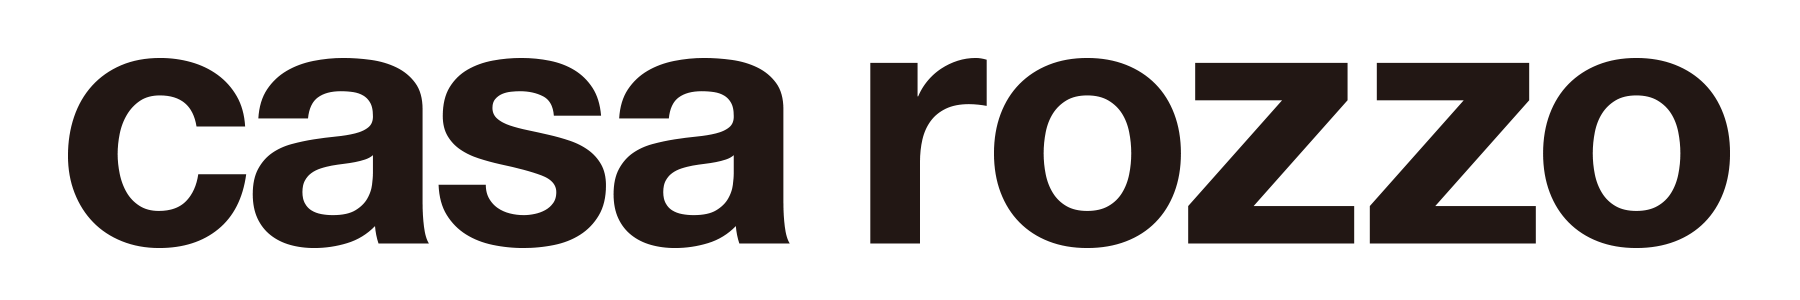 rozzo_logo.png